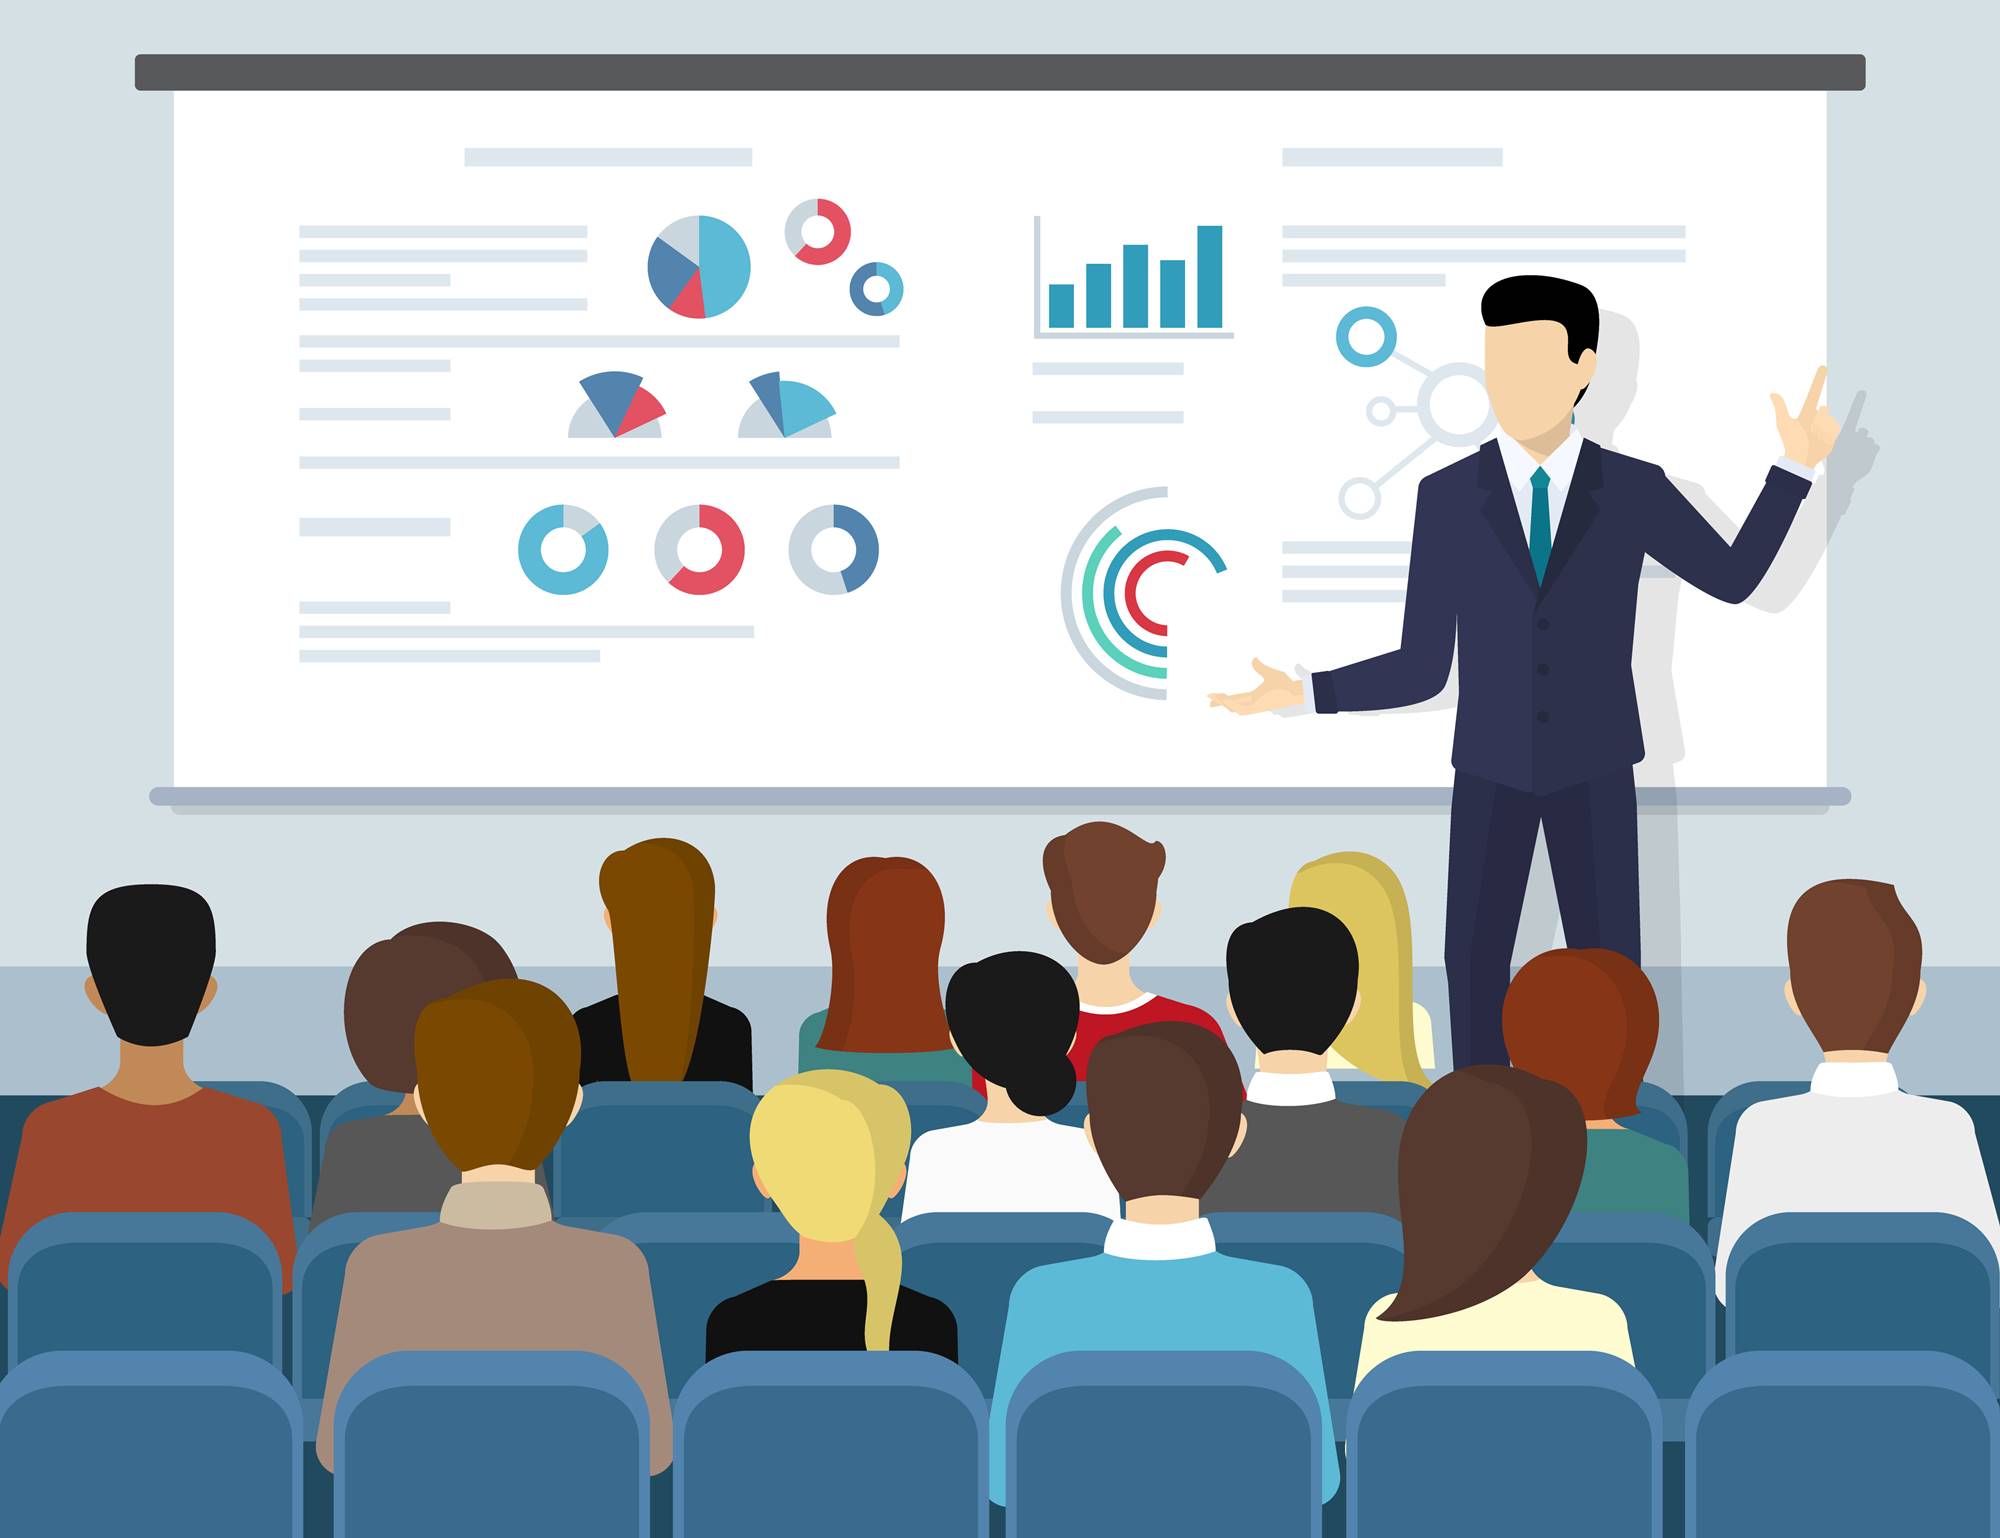 Business seminar speaker doing presentation and professional training about marketing, sales and e-commerce. Flat illustration of public conference and motivation for business audience